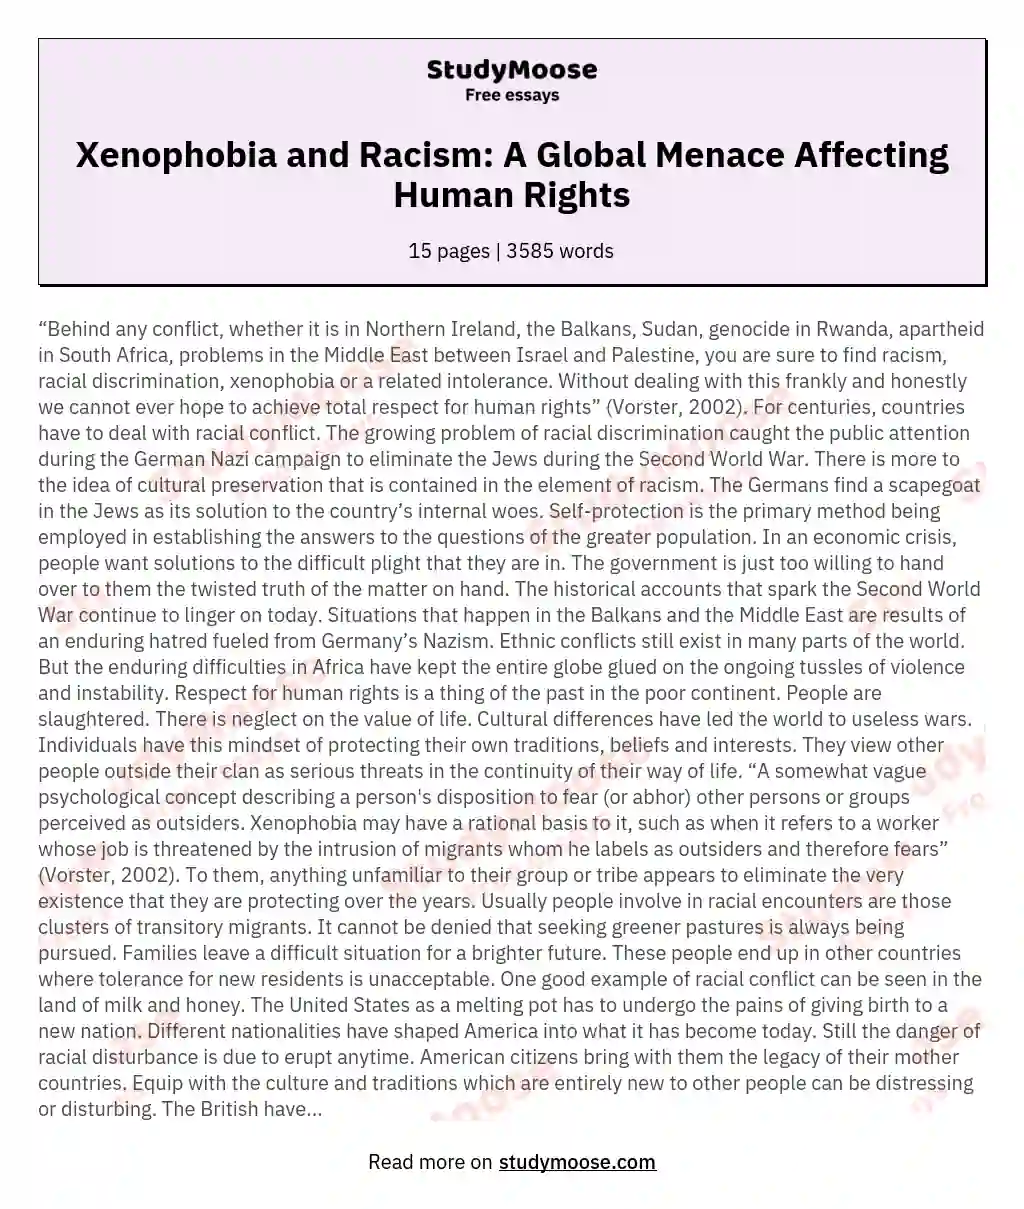 Racism and xenophobia